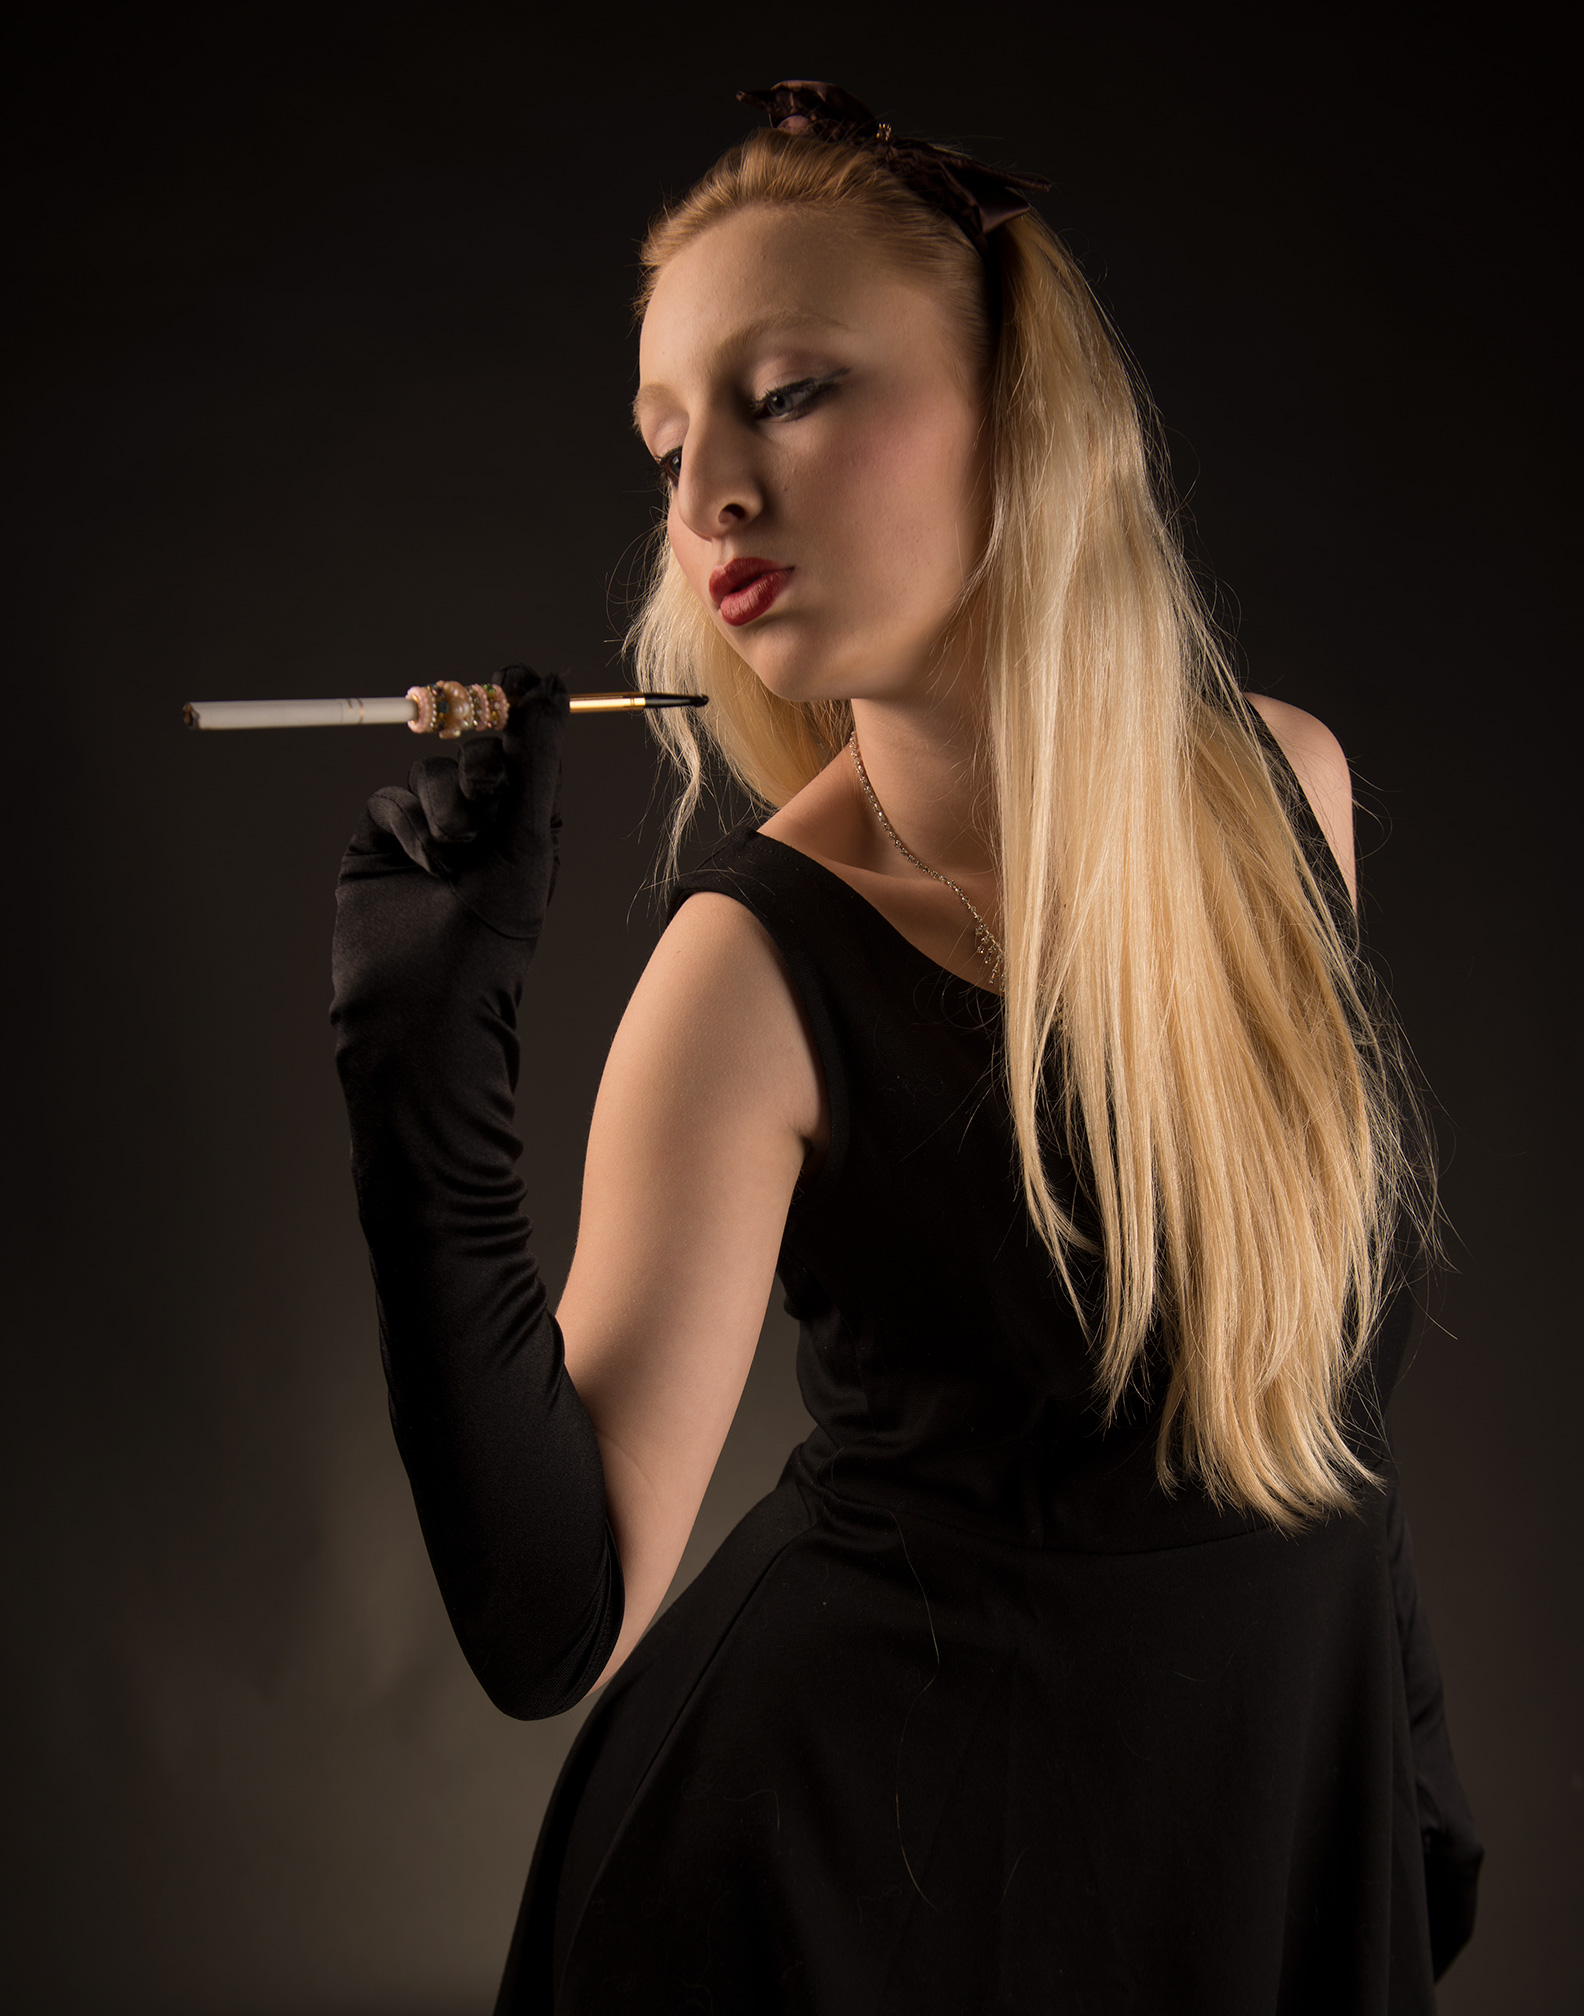 (Before Editing) Photograph of model with long cigarette and black dress